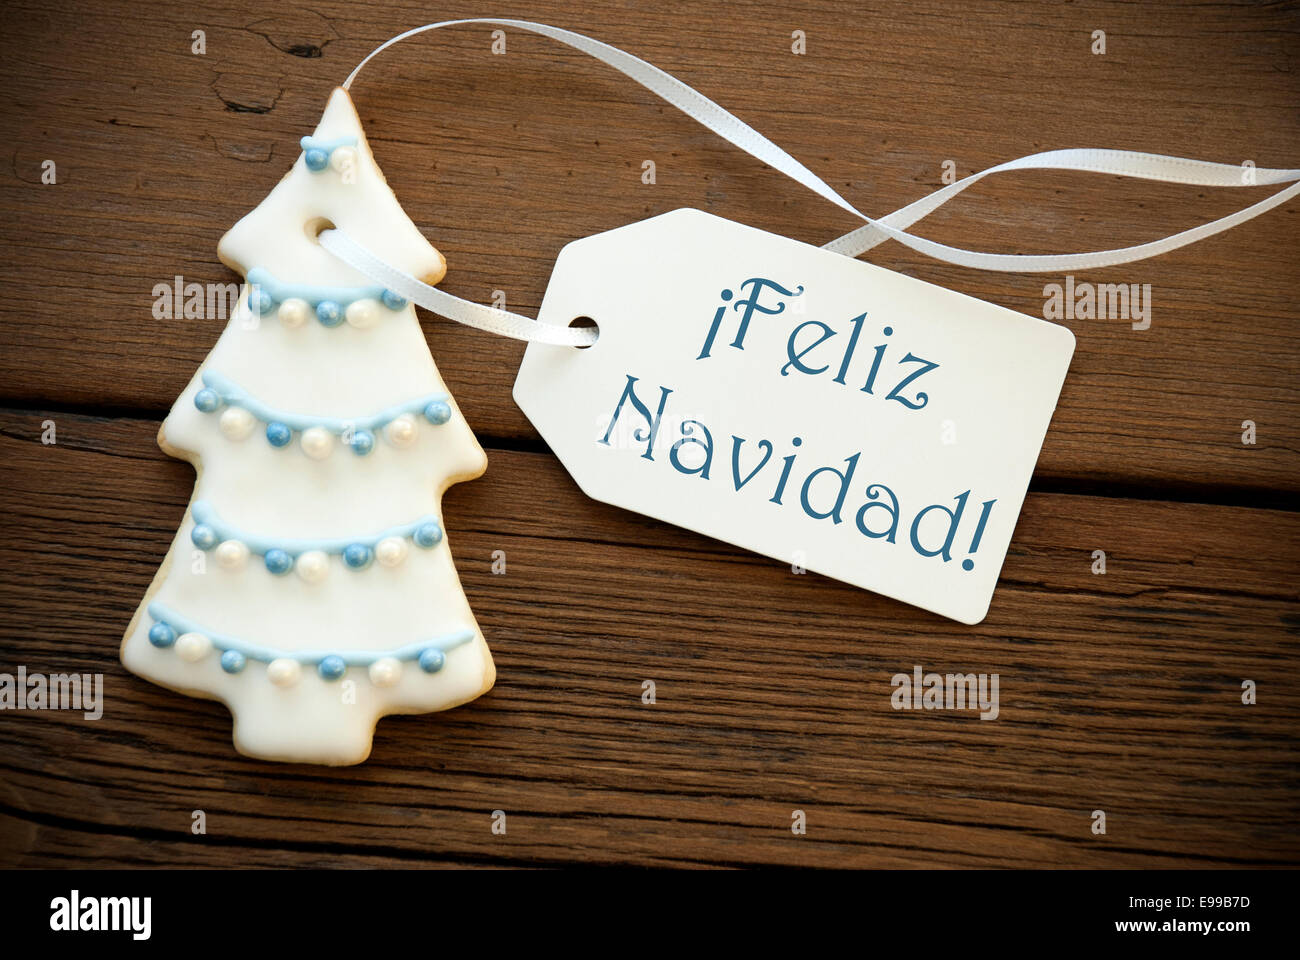 The Blue Spanish Words Feliz Navidad, which means Merry Christmas, on a white Label with a Christmas Tree Cookies Stock Photo